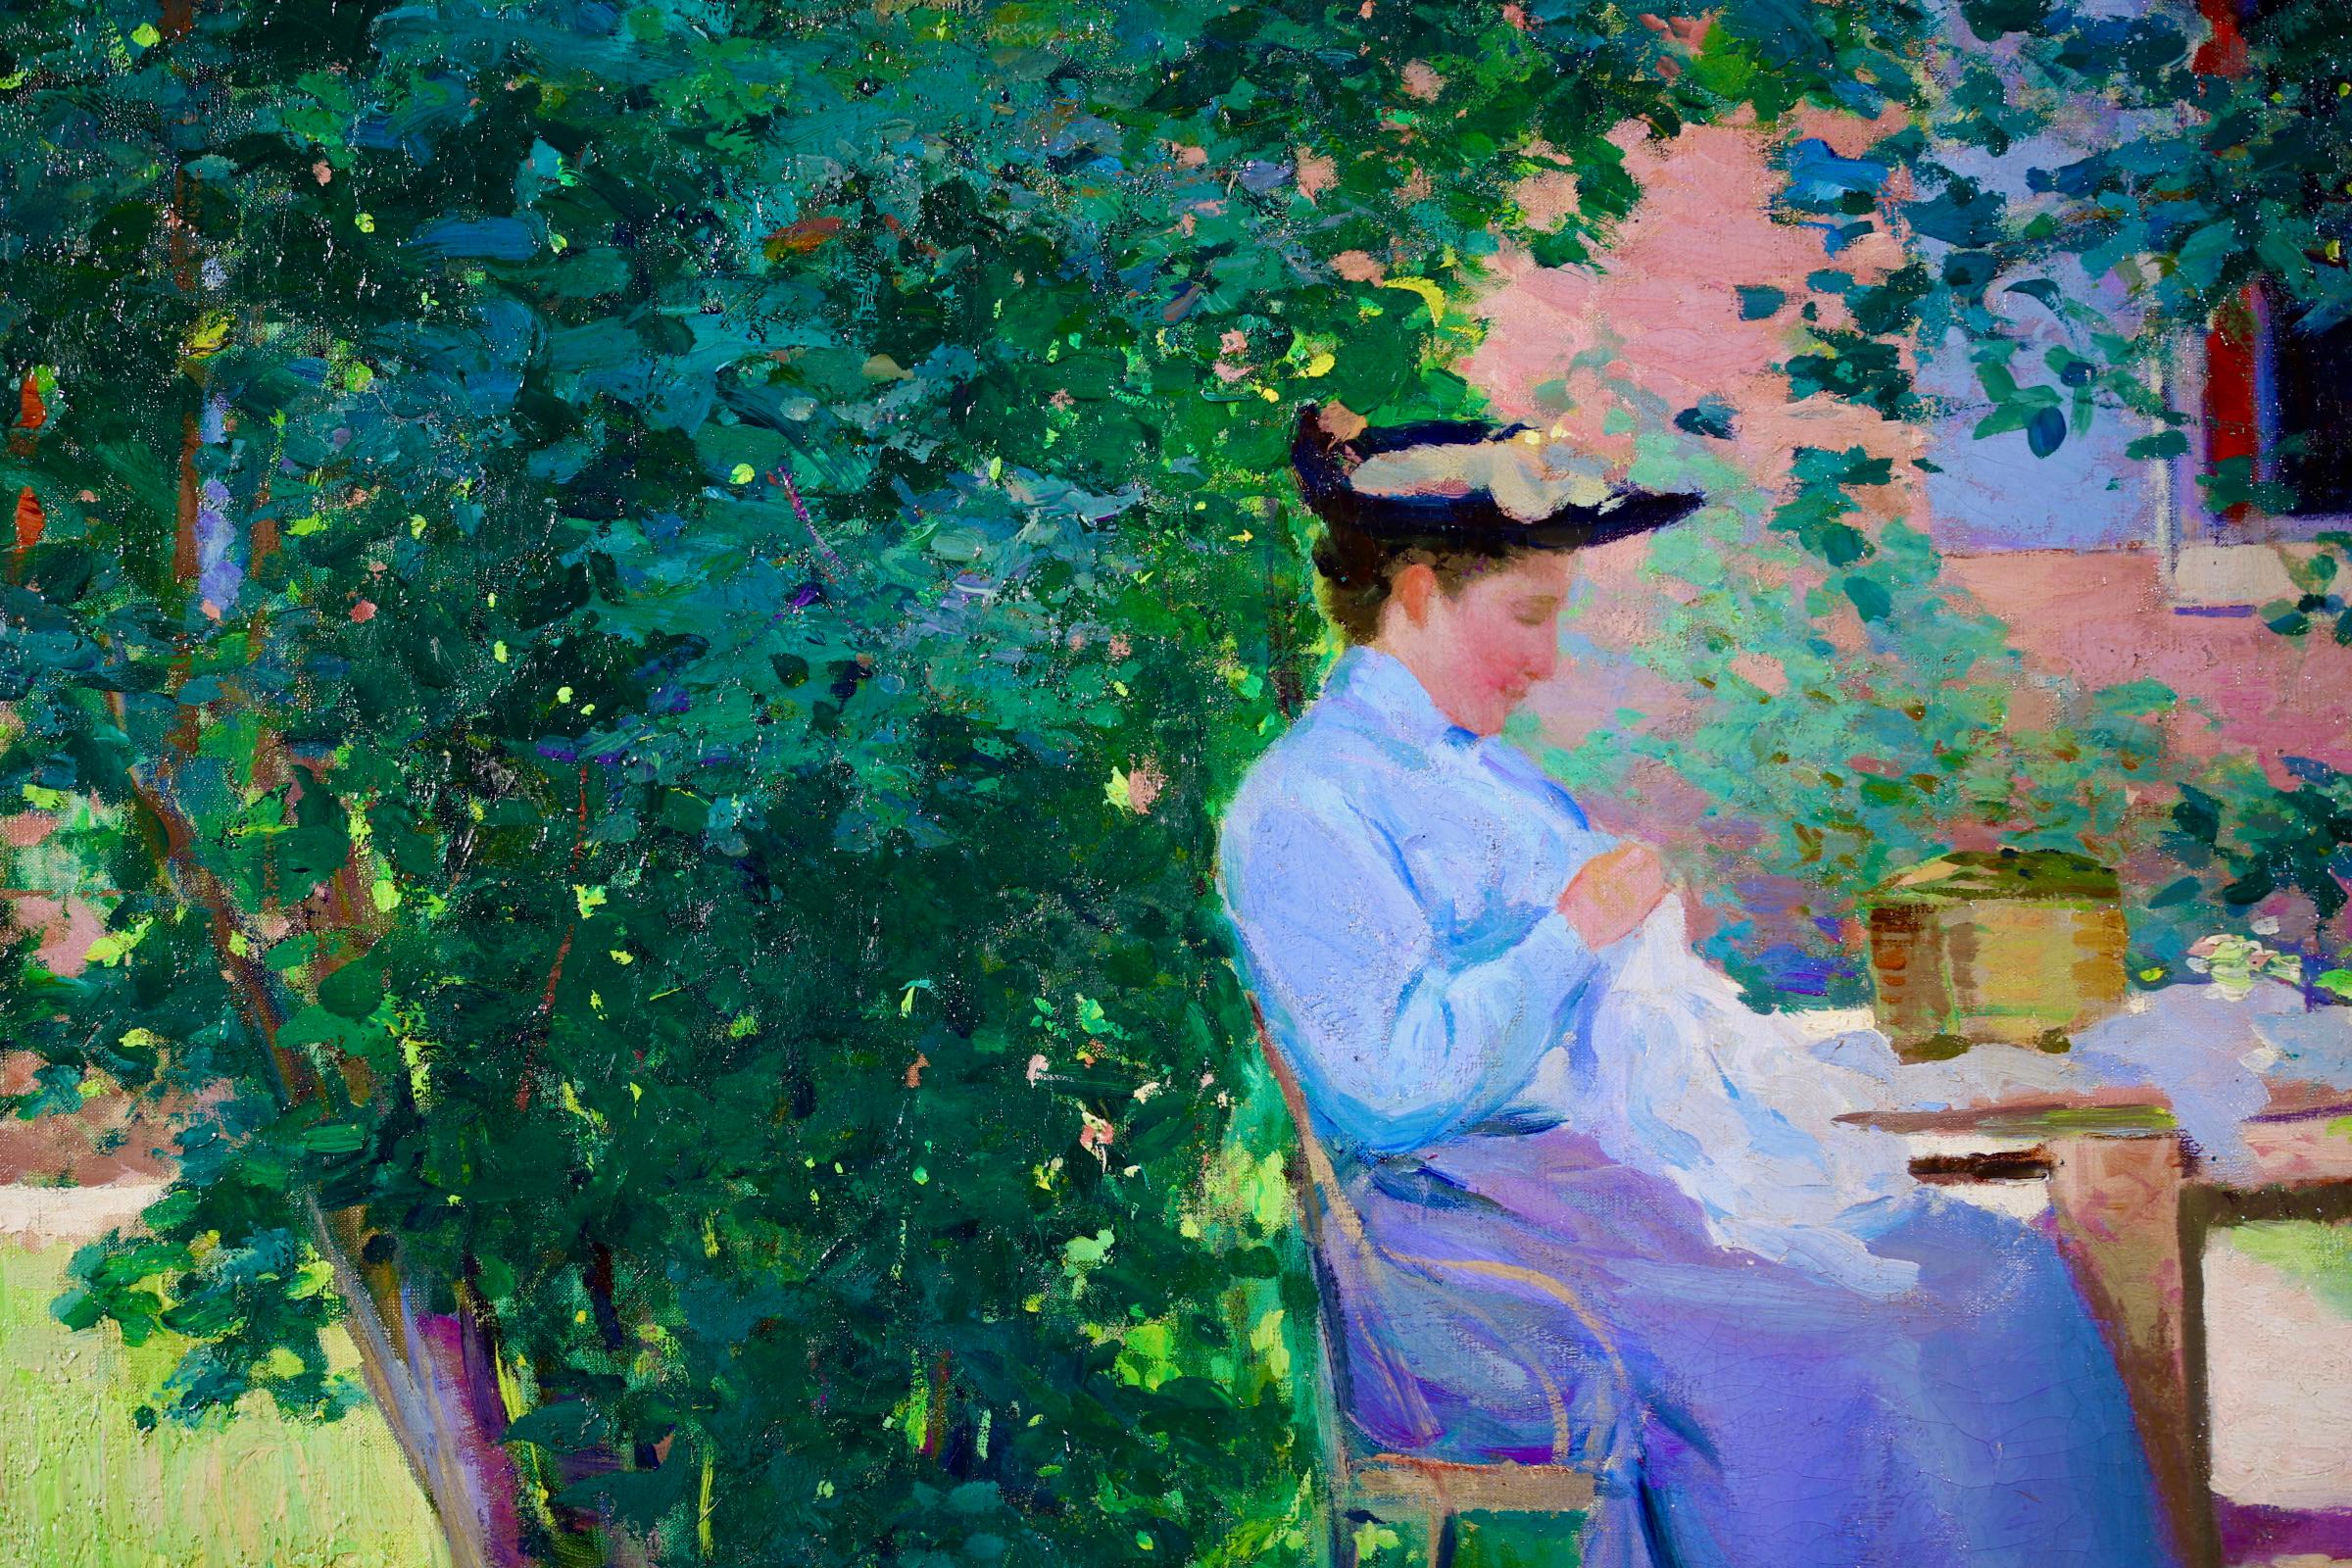 A stunning large oil on canvas circa 1900 by French painter Ferdinand Deconchy. The work depicts two seamstresses dressed in blue blouses and skirts seated in a garden in the shade of trees as they sew. Deonchy was close friends with both Monet and